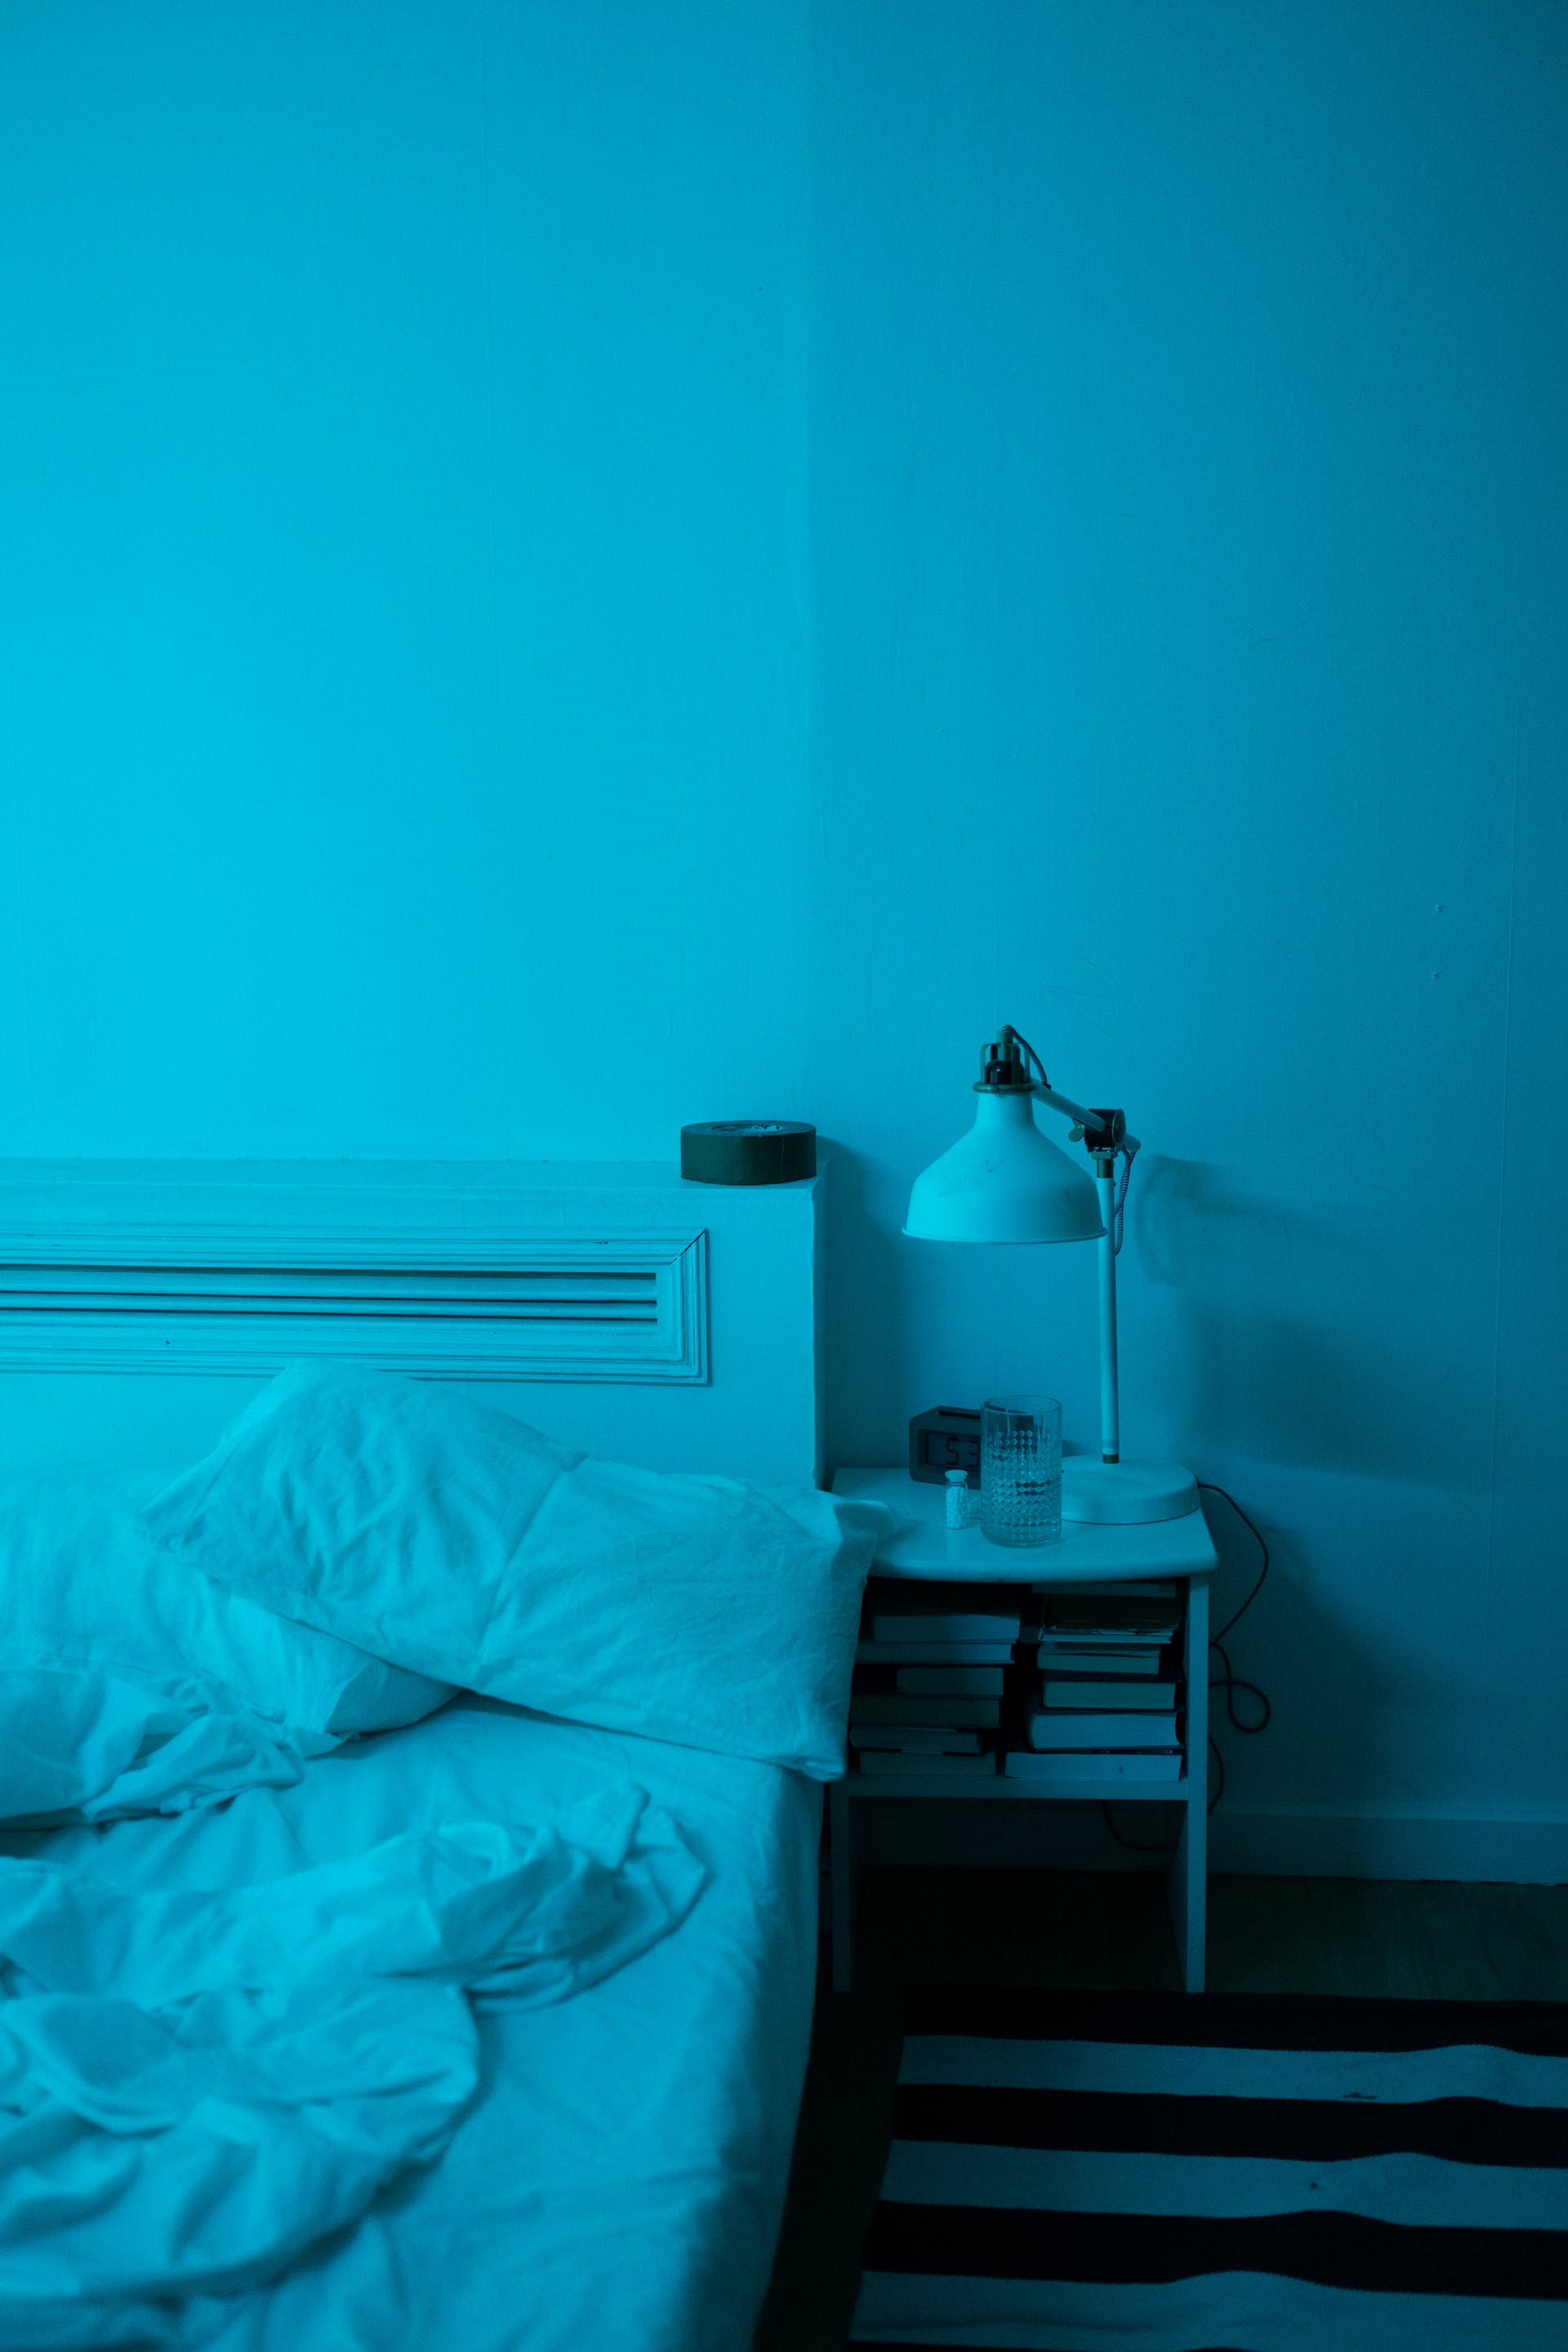 Empty bed at night | Source: Pexels